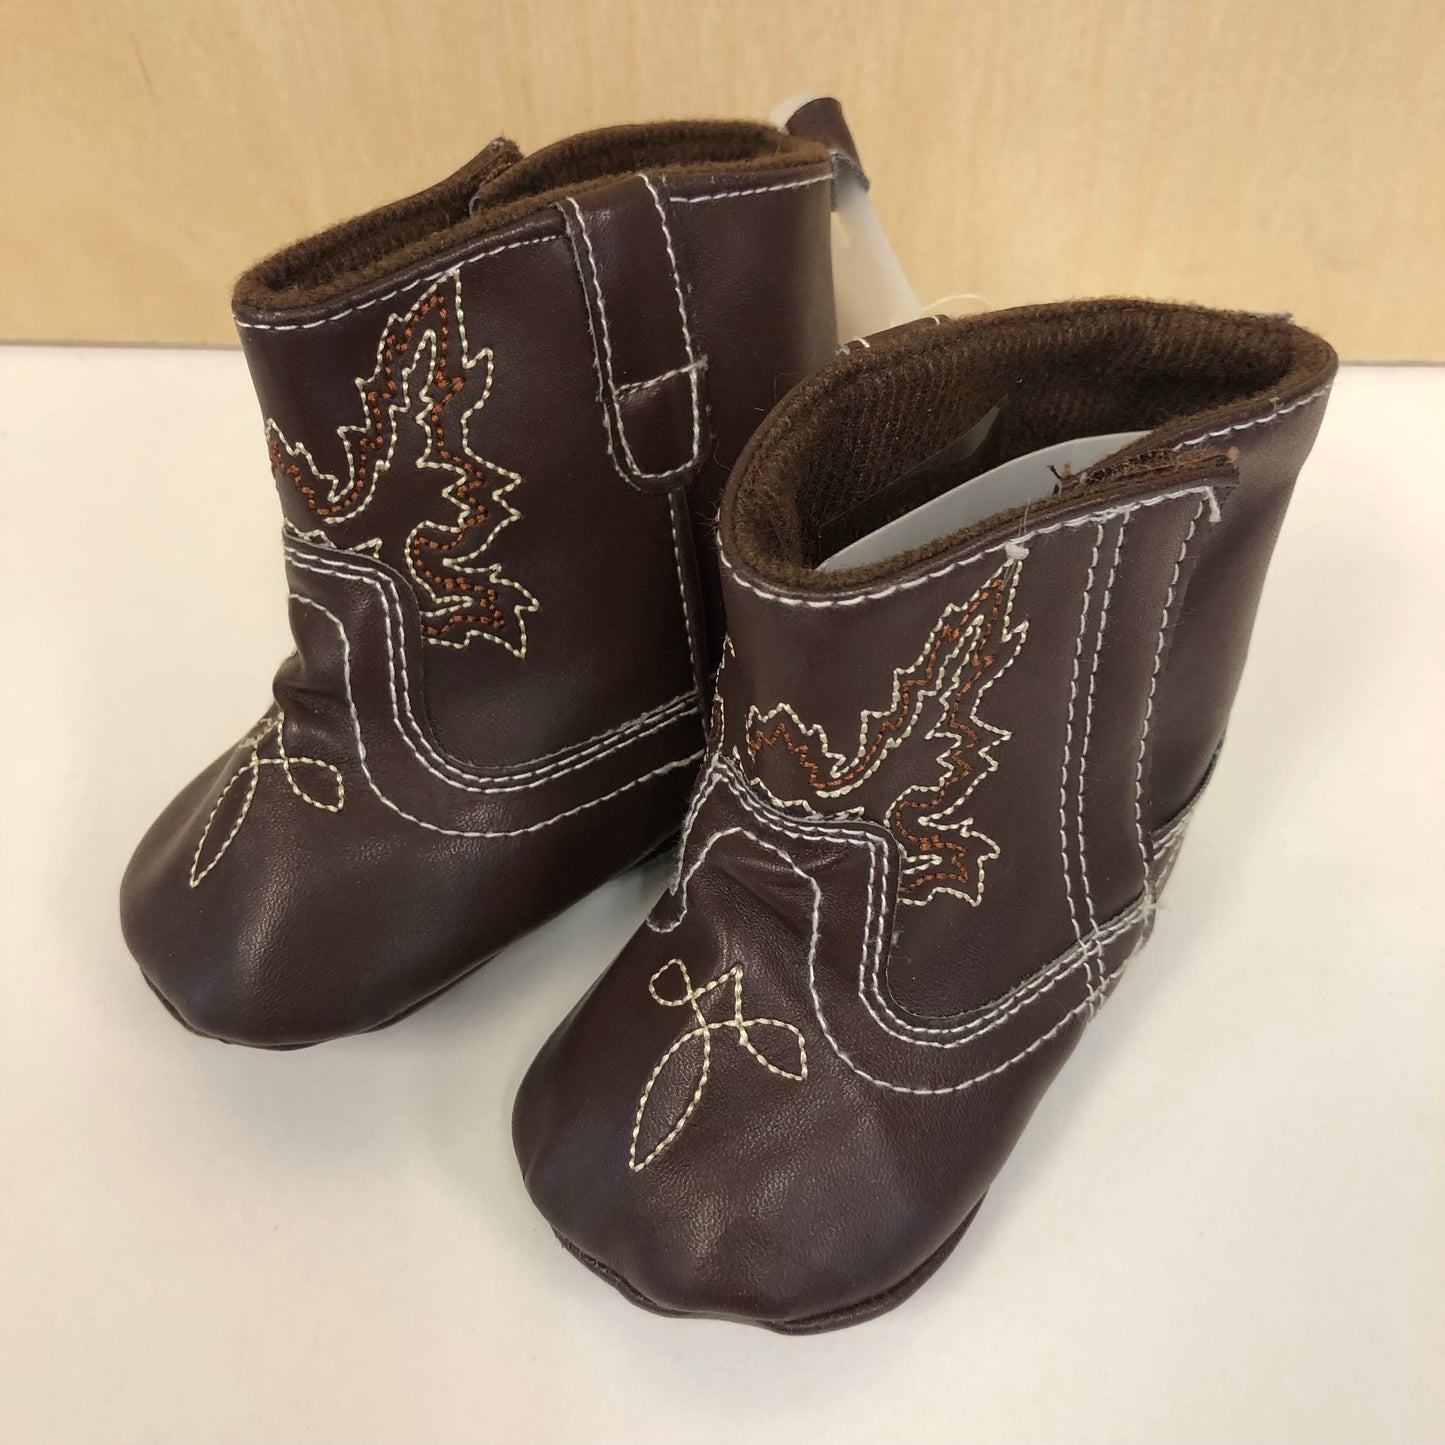 Brown Soft Sole Boots NEW!